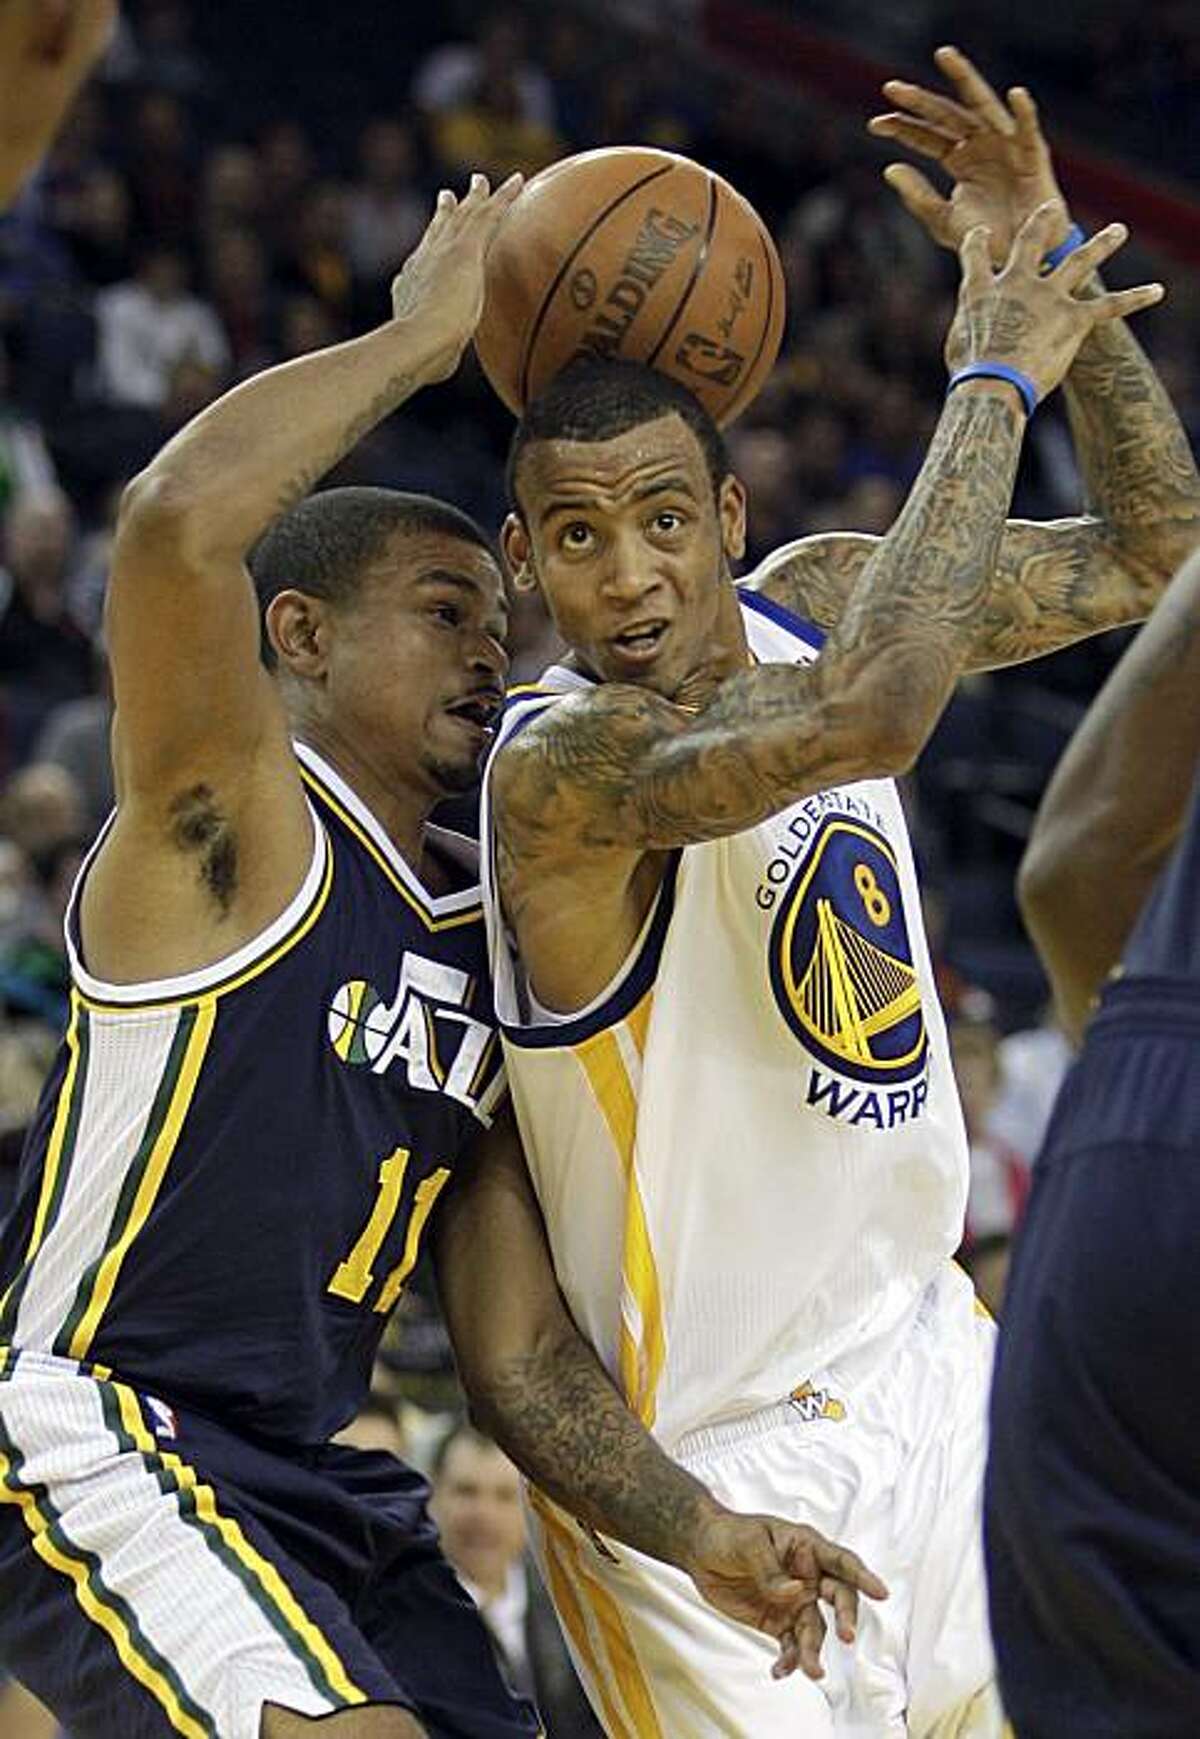 Utah Jazz guard Earl Watson, left, and Golden State Warriors' Monta Ellis fight for the ball during the first half of an NBA basketball game Friday, Nov. 5, 2010, in Oakland, Calif.